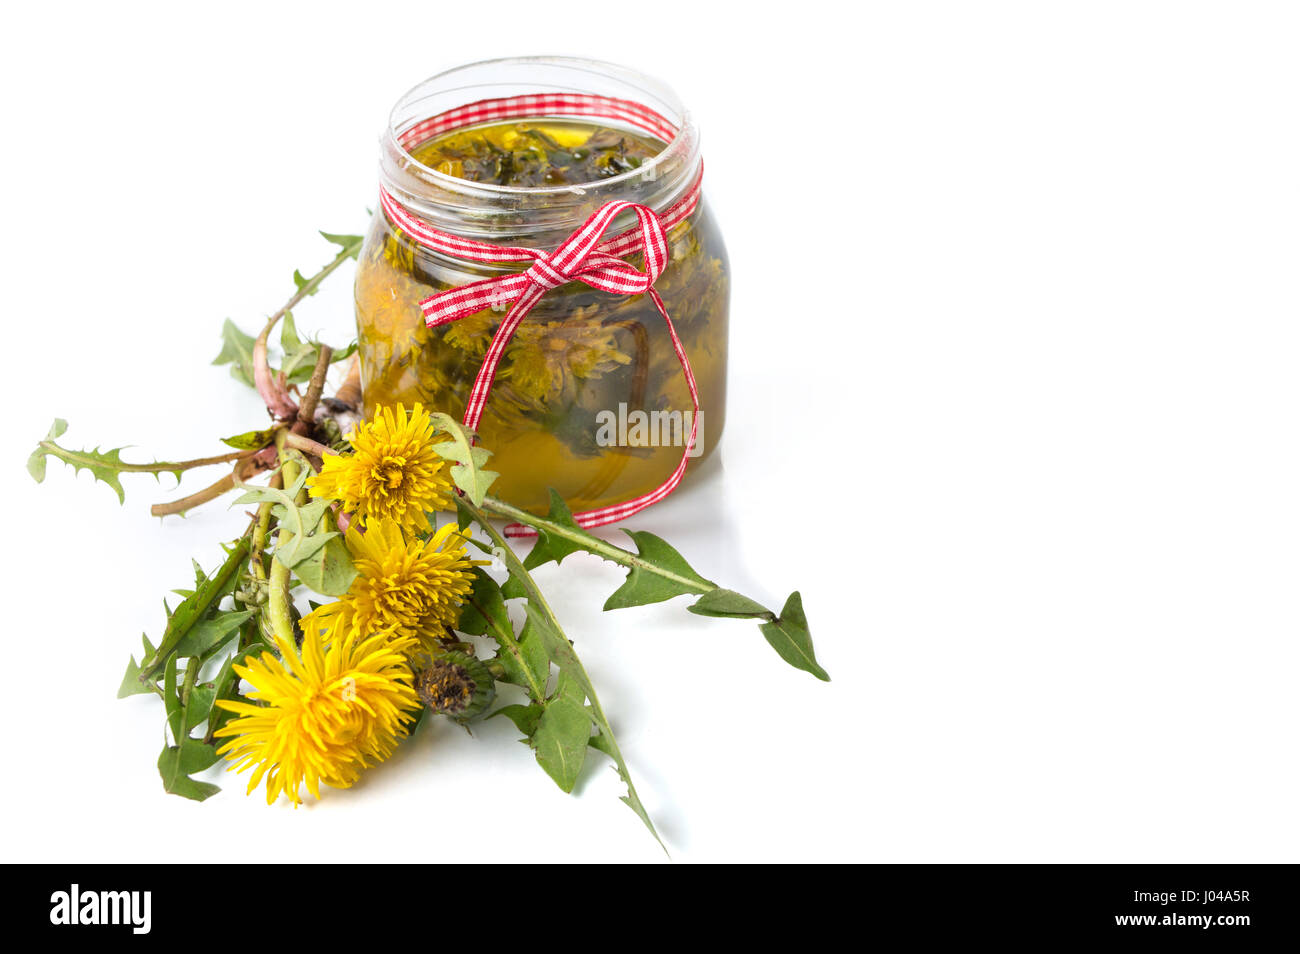 Dandelion flowers and oil in a jar isolated Stock Photo